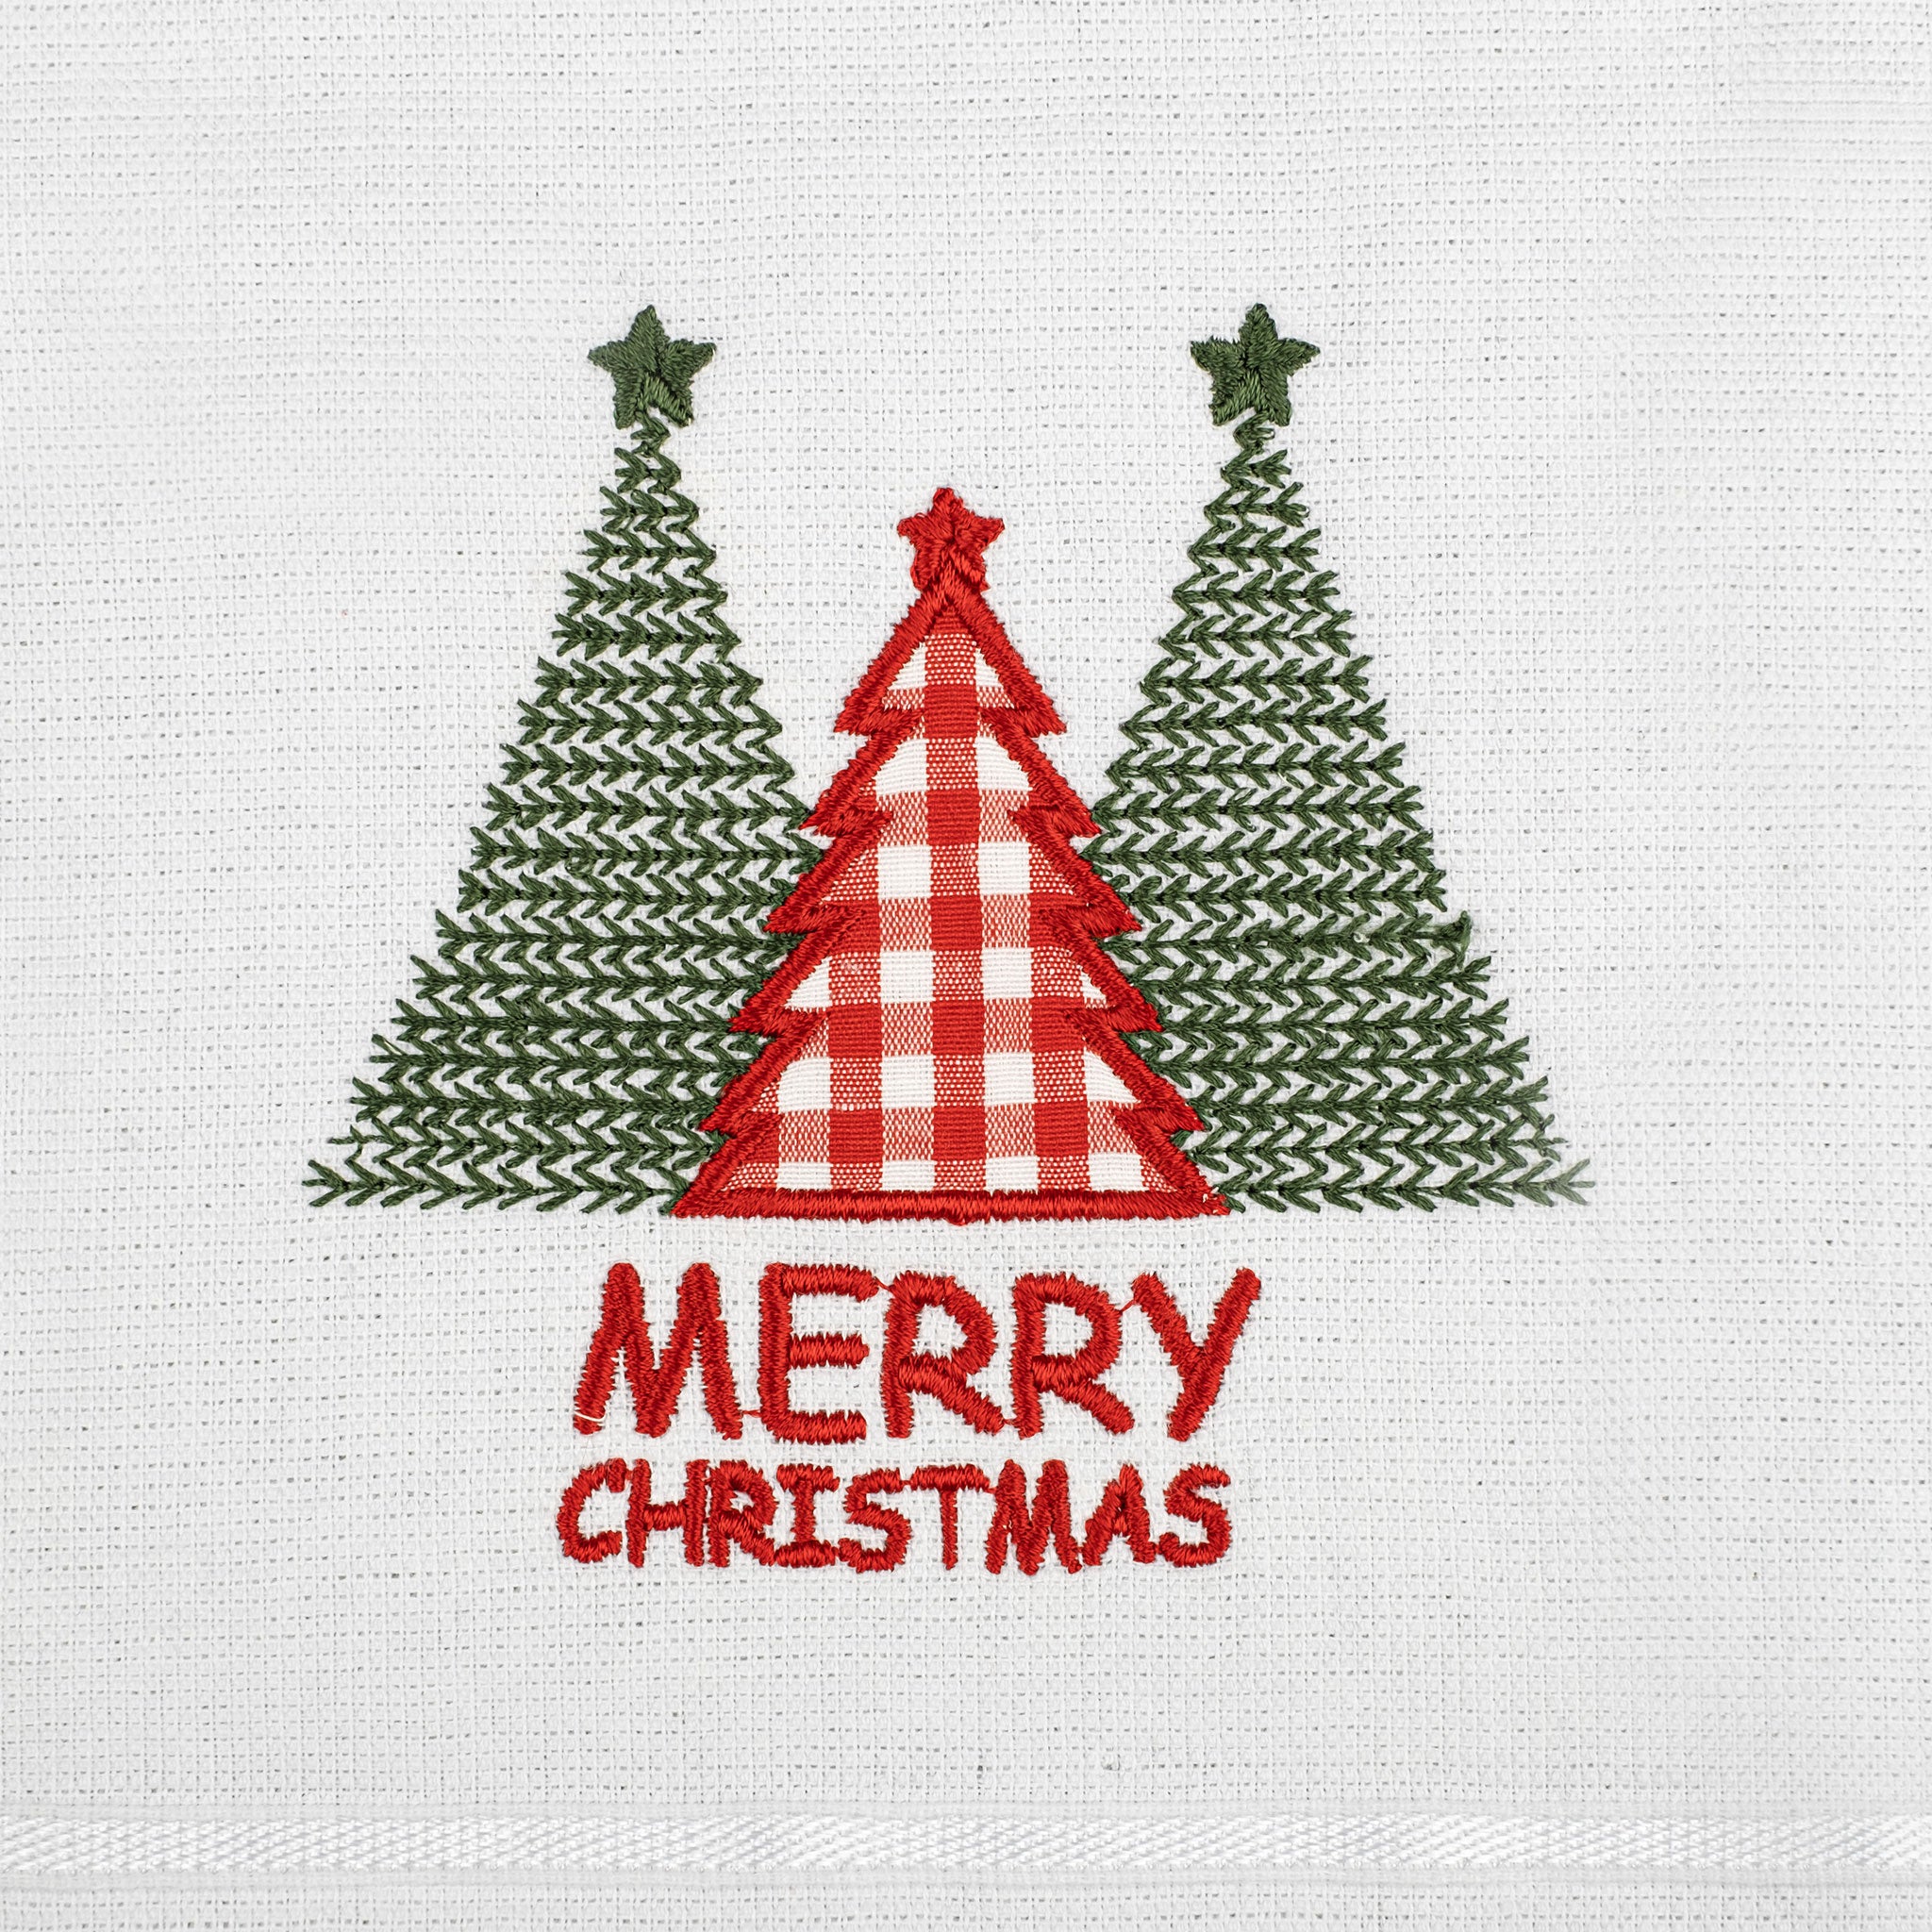  American Soft Linen - Christmas Towels Set 2 Packed Embroidered Turkish Cotton Hand Towels - Christmas Tree Socks - 2